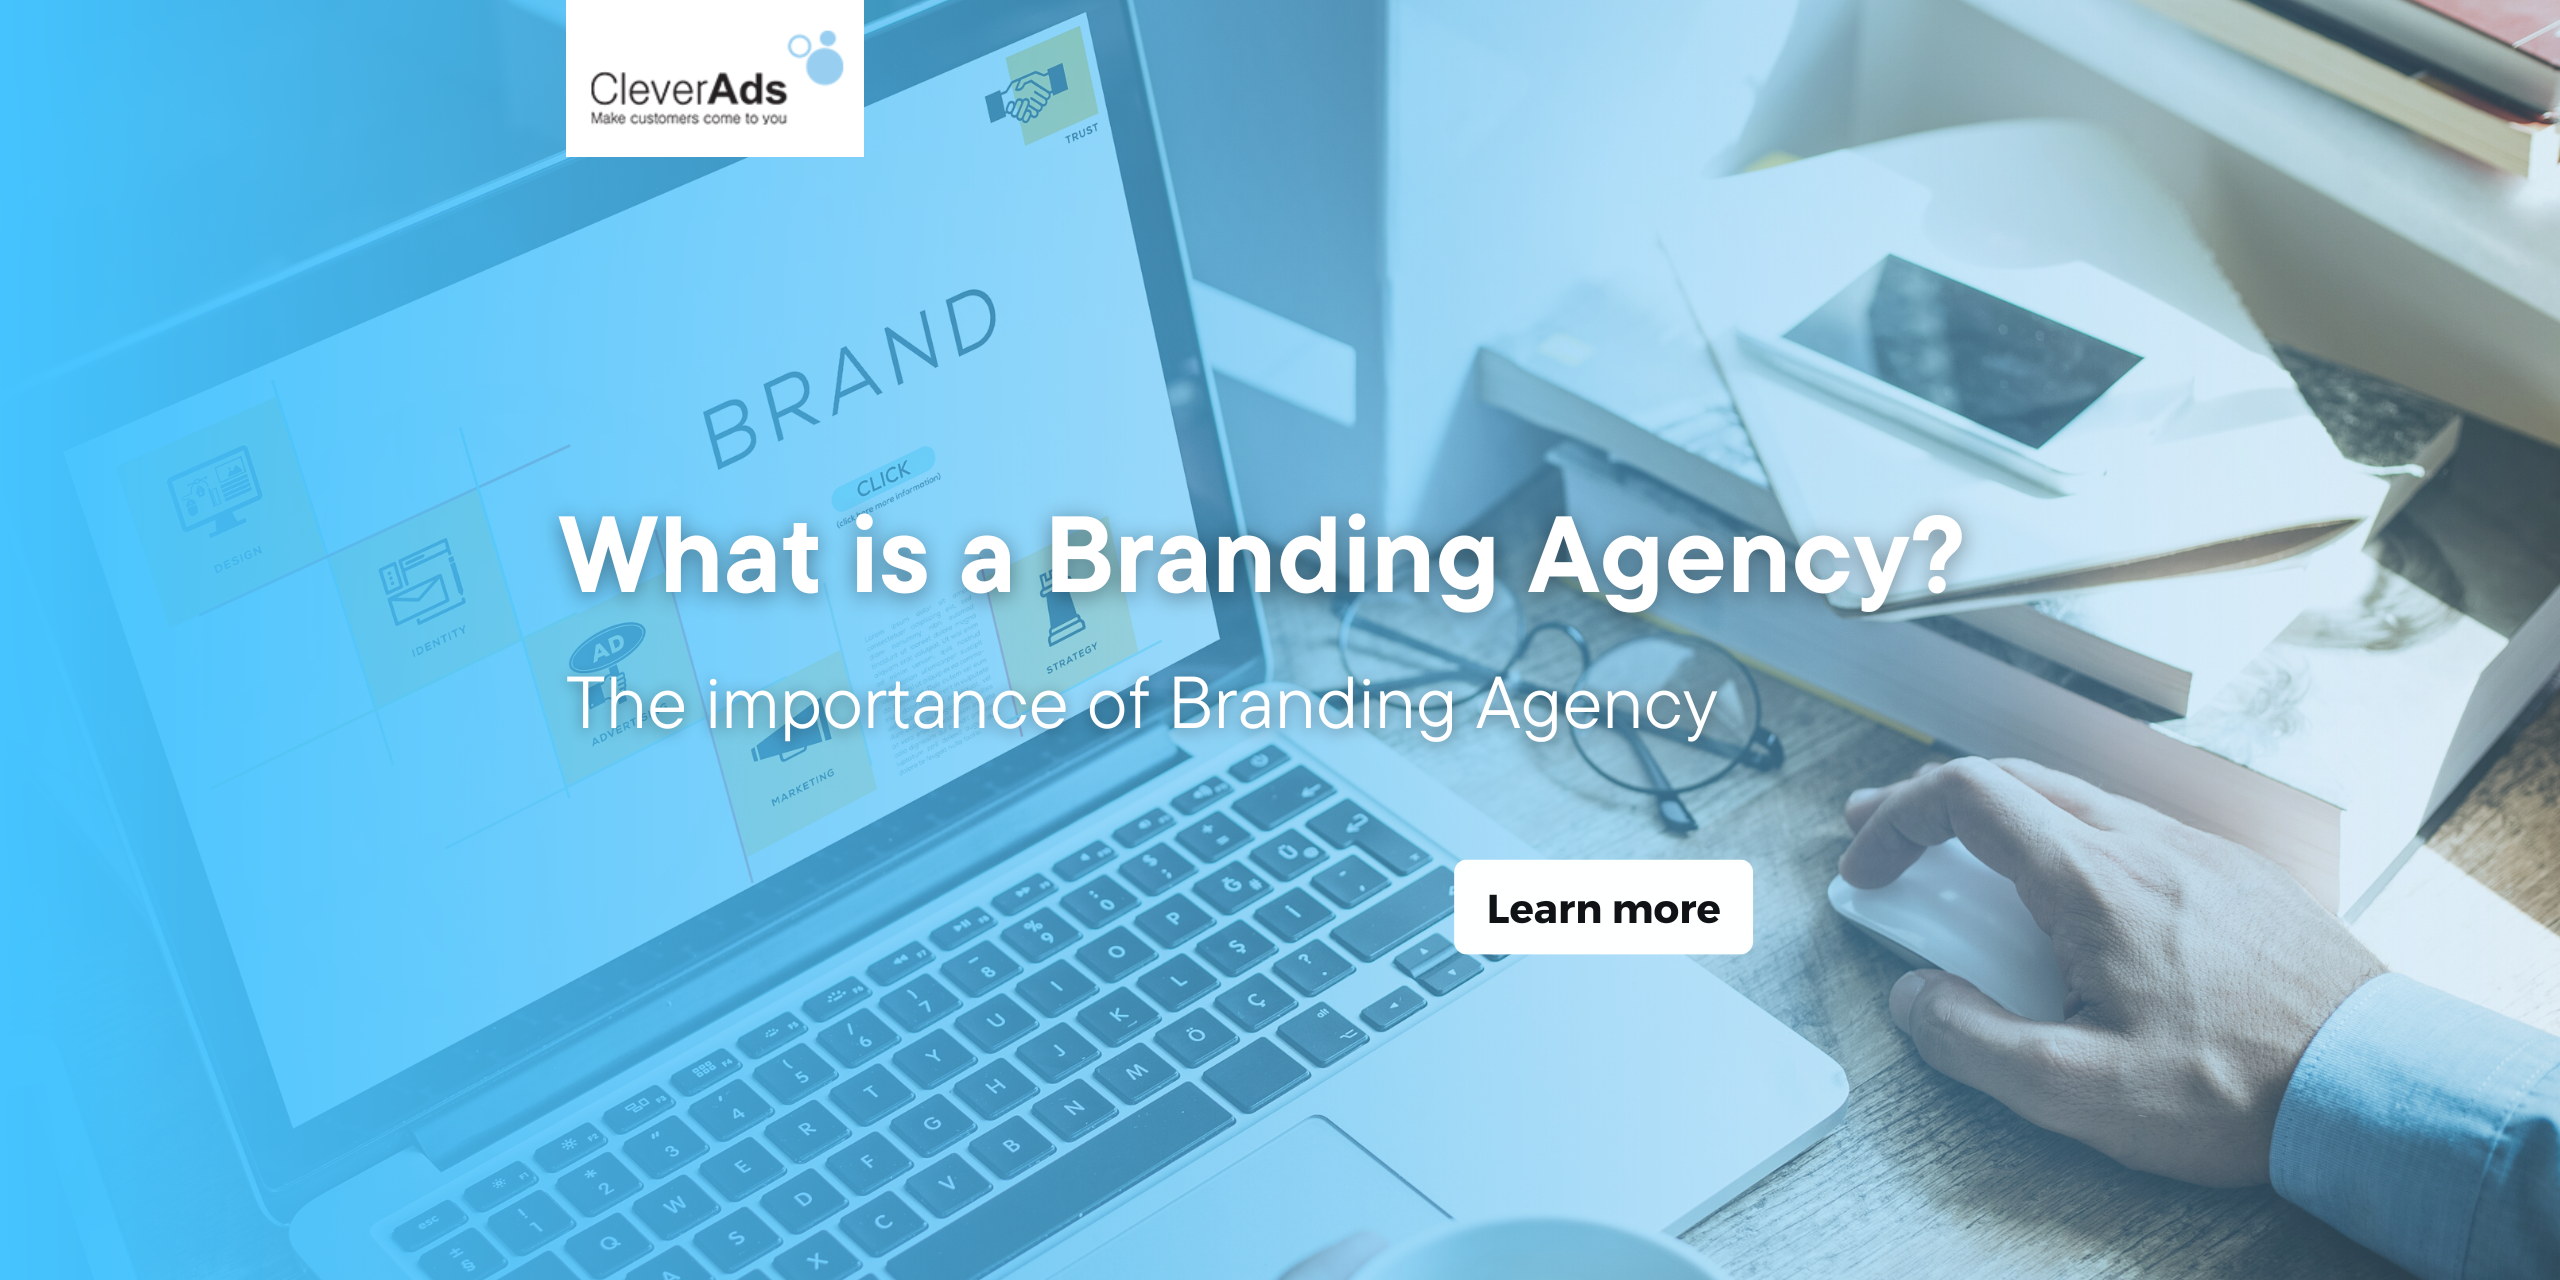 What is a branding Agency? The importance of Branding Agency